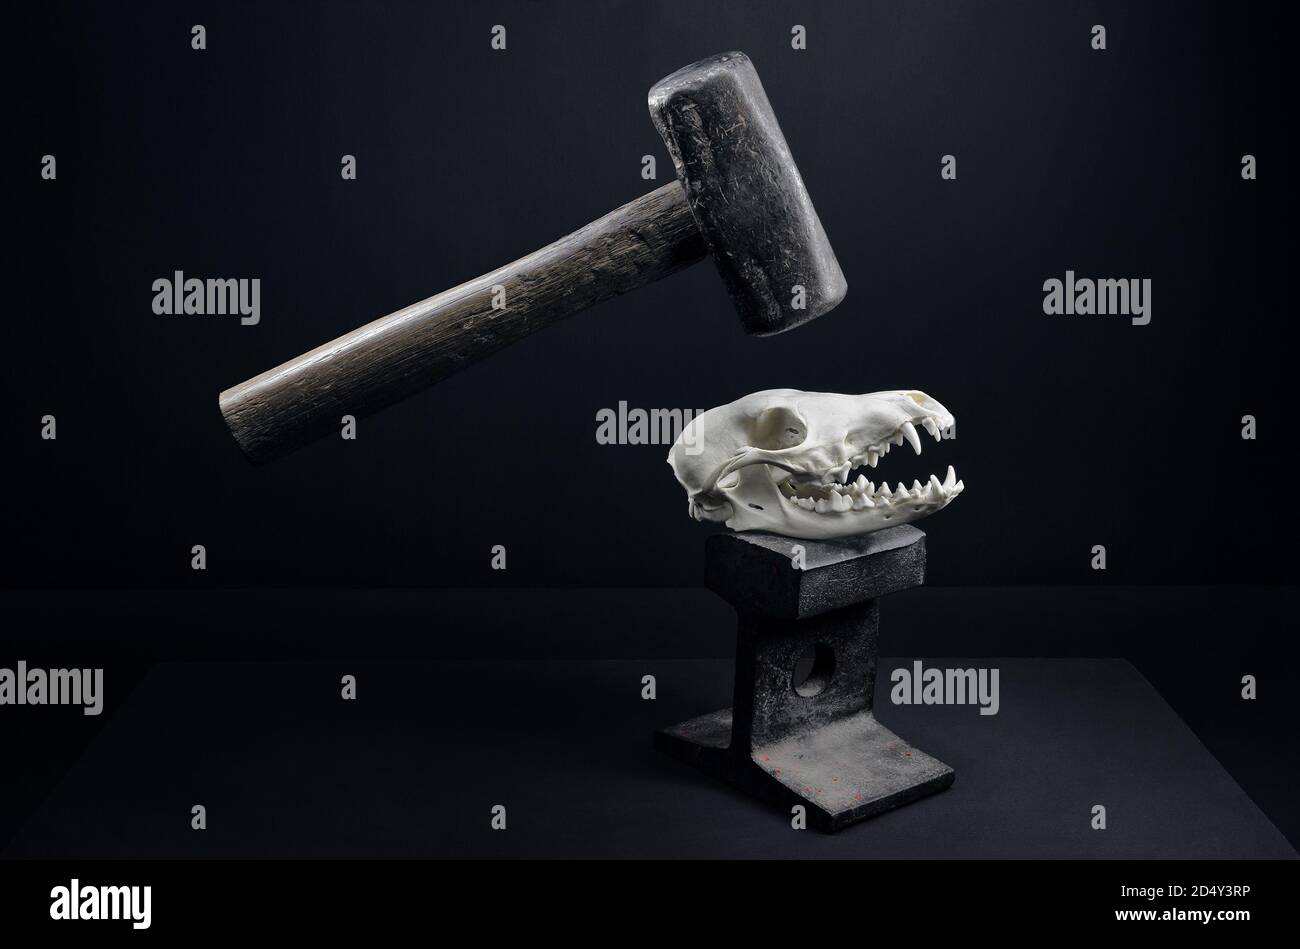 Caught between the hammer and the anvil. Showing the heavy killing impact humans have on nature. Stock Photo